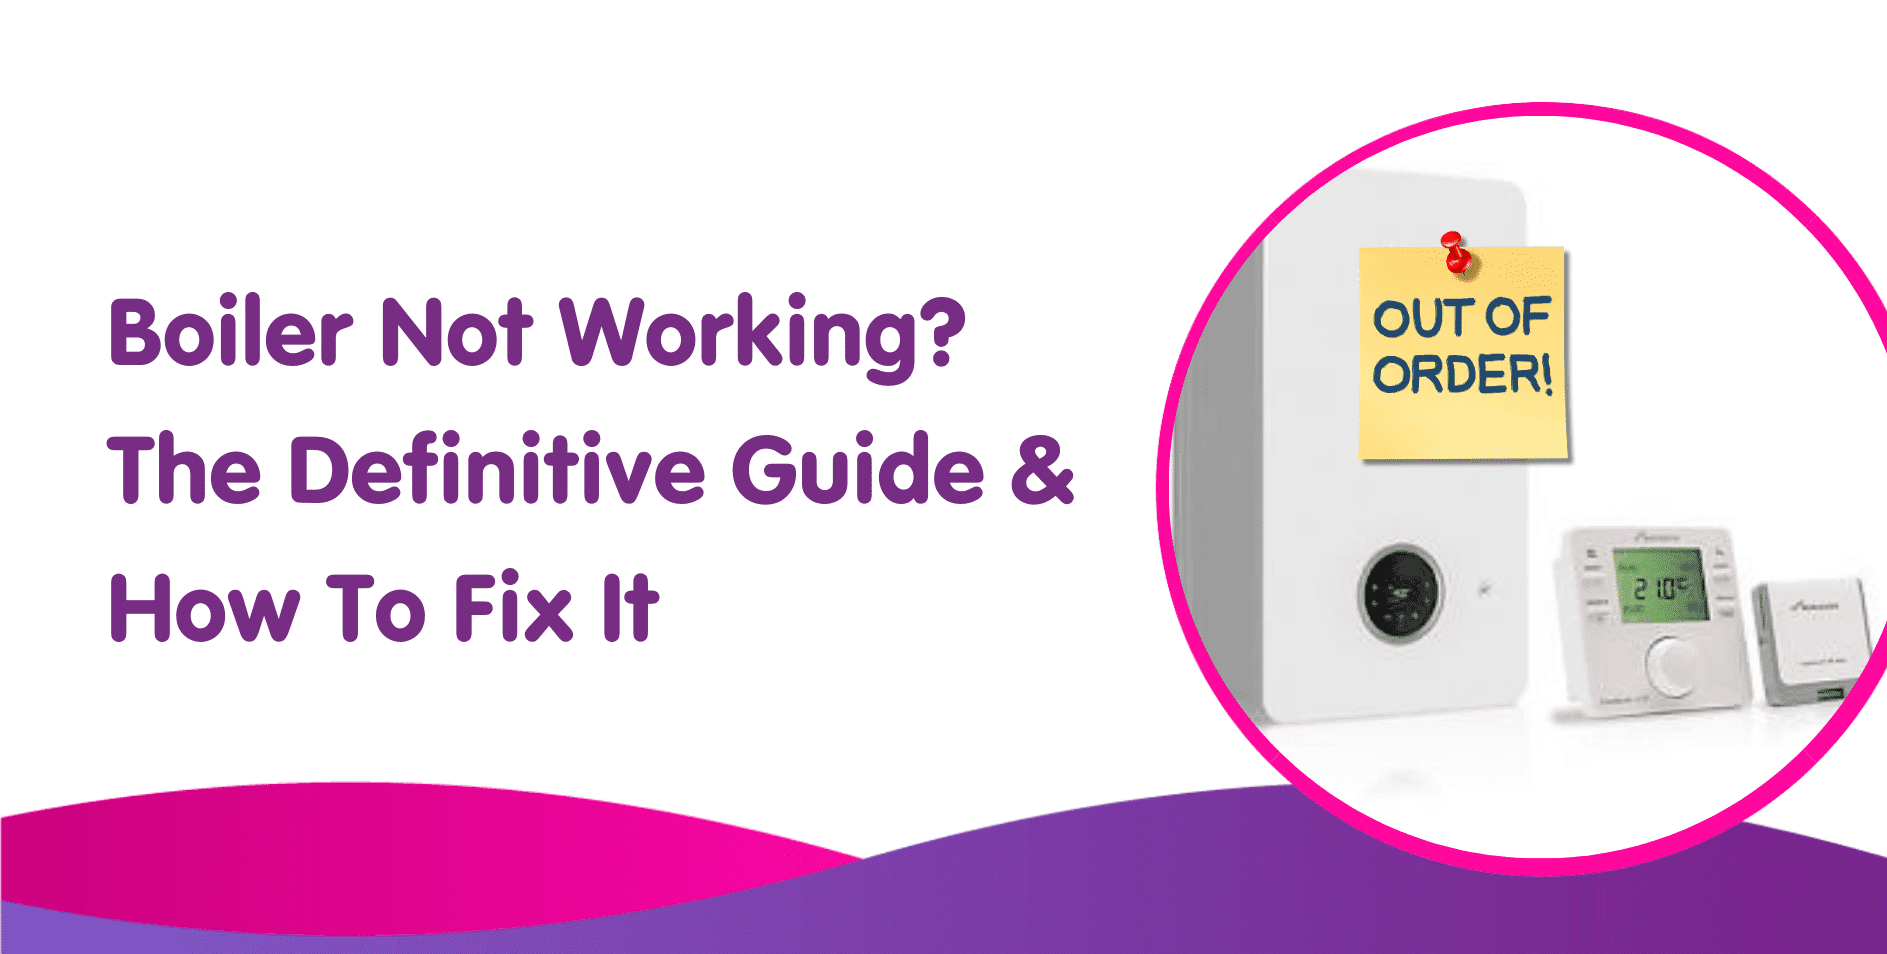 Boiler Not Working: The Definitive Guide & How To Fix It